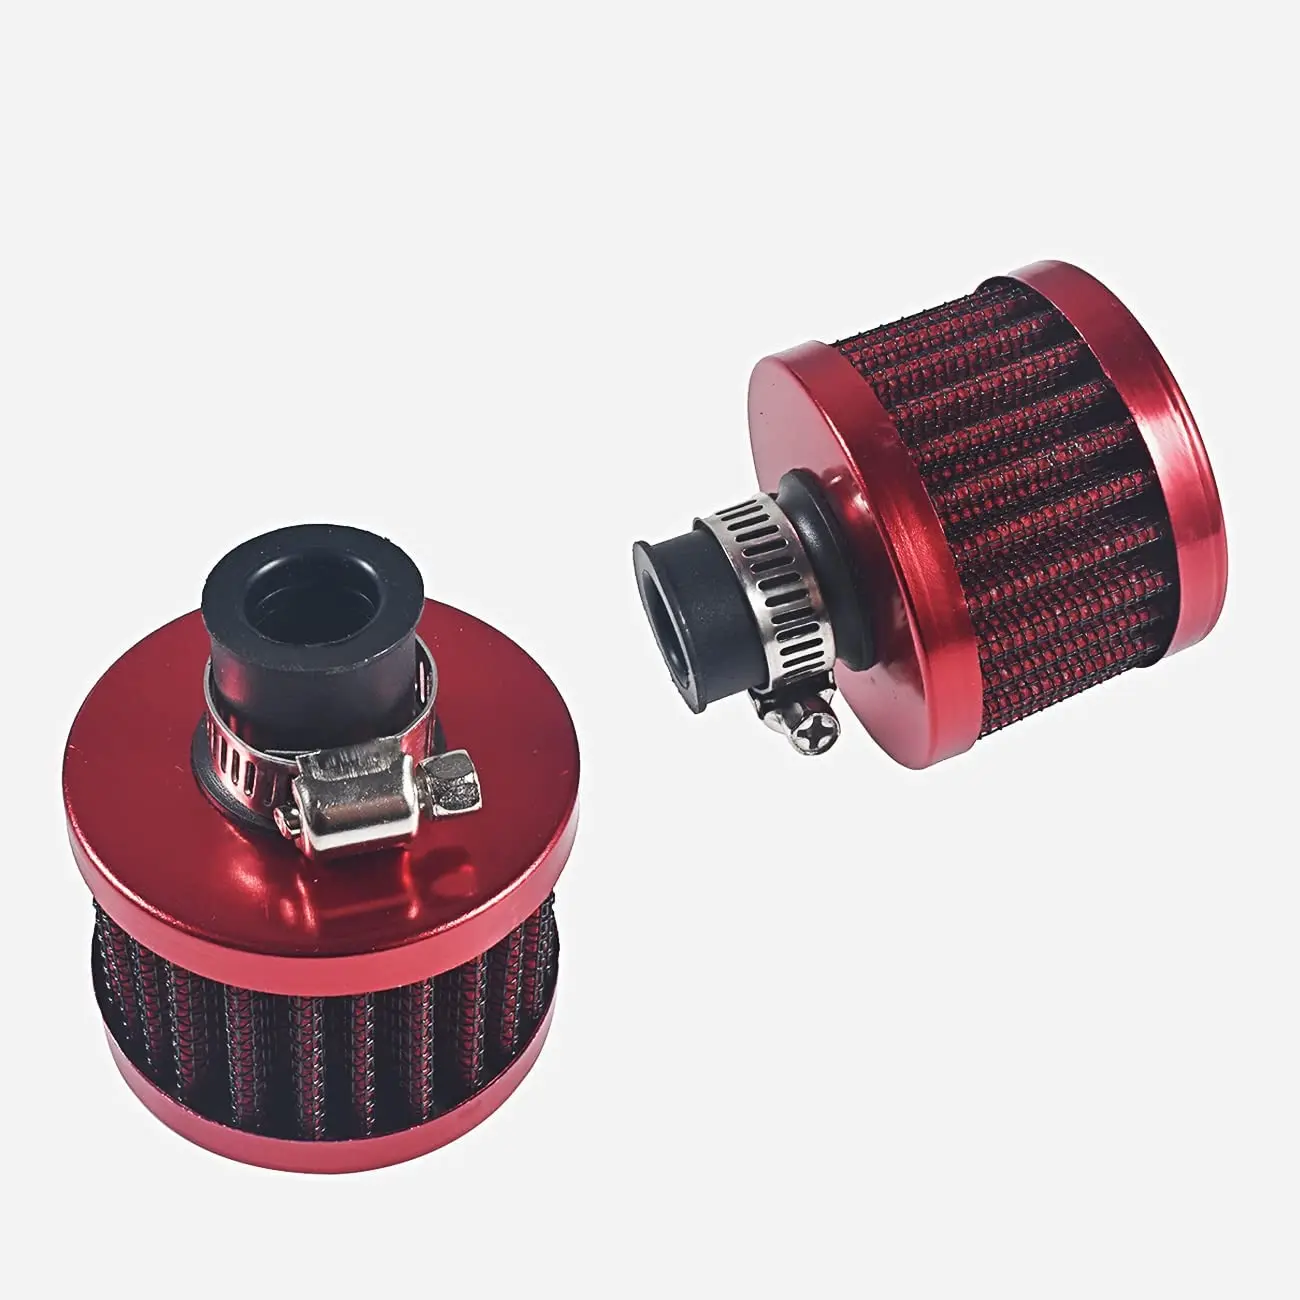 2pcs 12mm Red Cold Air Intake Filter Turbo Vent Crankcase Car Breather Valve Cover fit f30 2013 2016 228i 320i 328i 420i 428i 2 0t n20 n26 3 5 cold air intake system